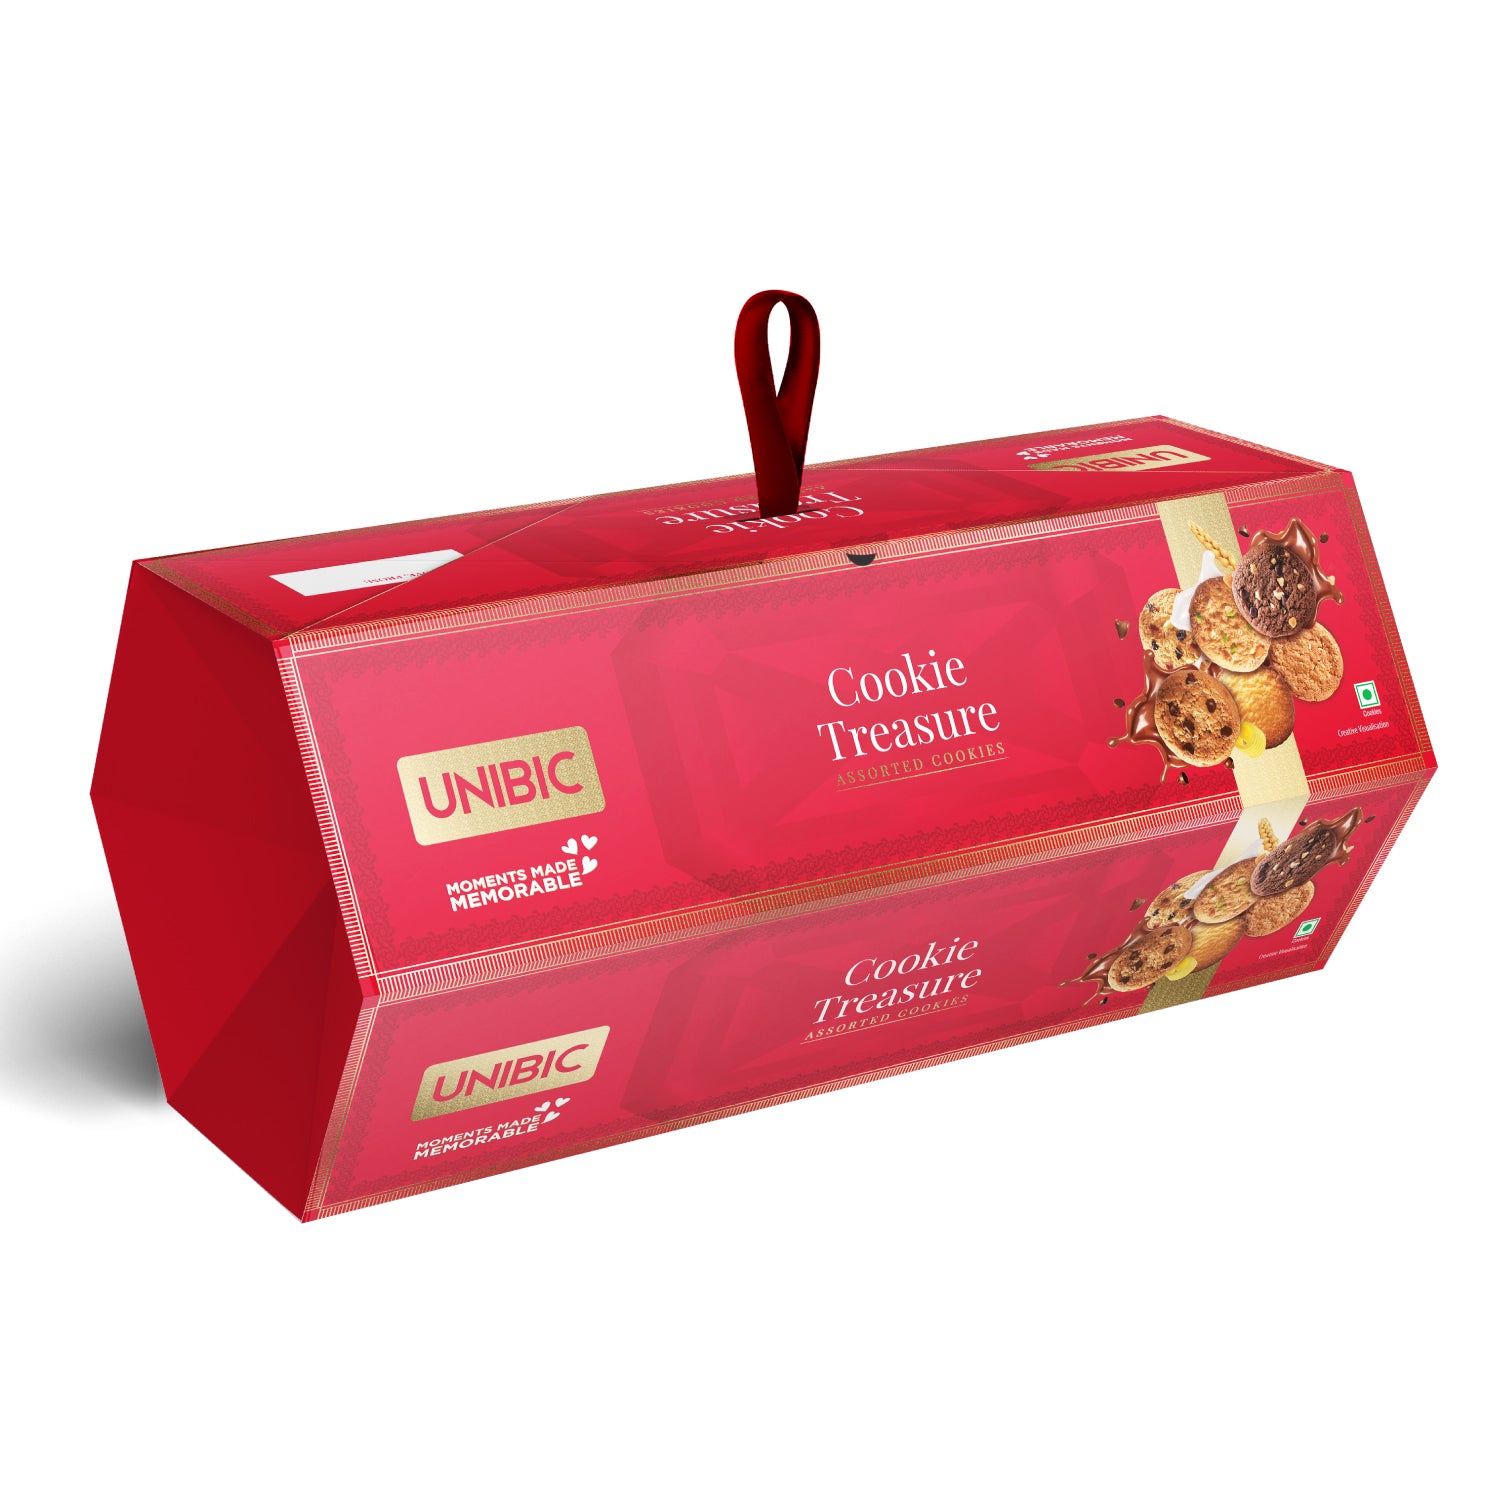 UNIBIC Fruit and nut | Choco Nut 500gm (Pack of 2 - 500 GRAM) Cookies Price  in India - Buy UNIBIC Fruit and nut | Choco Nut 500gm (Pack of 2 - 500  GRAM) Cookies online at Flipkart.com